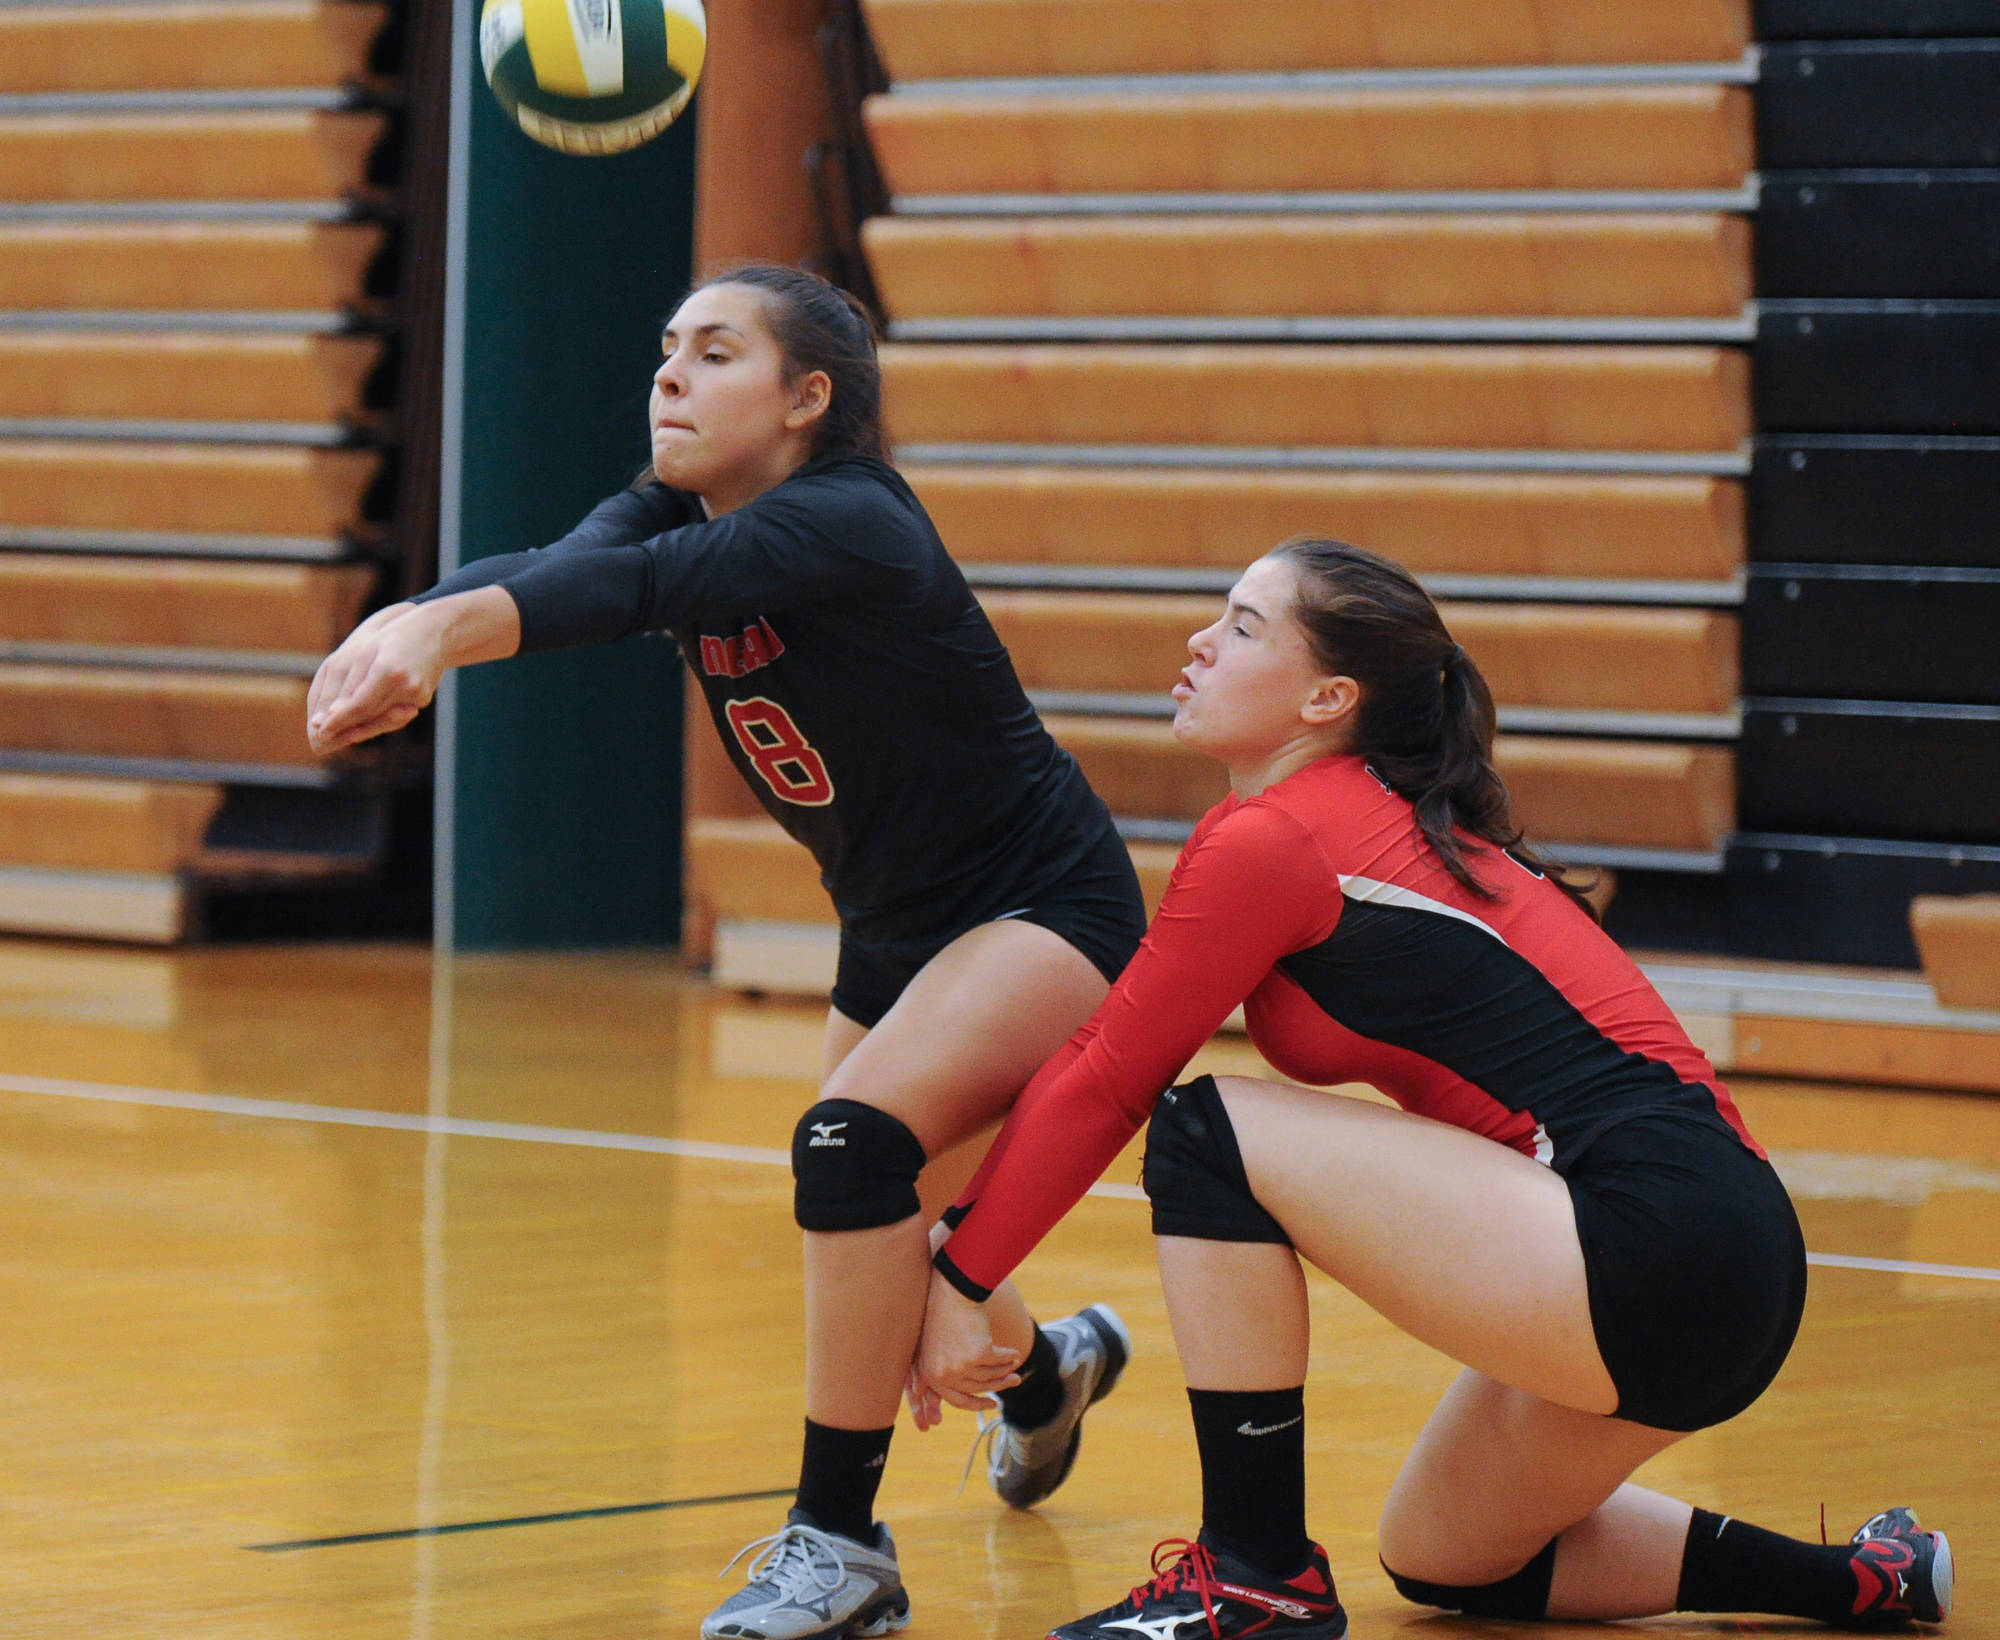 From left, Juneau-Douglas’ Miranda Mitchell and Abby Dean combine on a return of serve against Kenai during the Dimond-Service Tournament at Service High School in Anchorage on Friday. The Crimson Bears lost to the Kardinals 25-19 and 25-22. (Michael Dinneen | Juneau Empire)